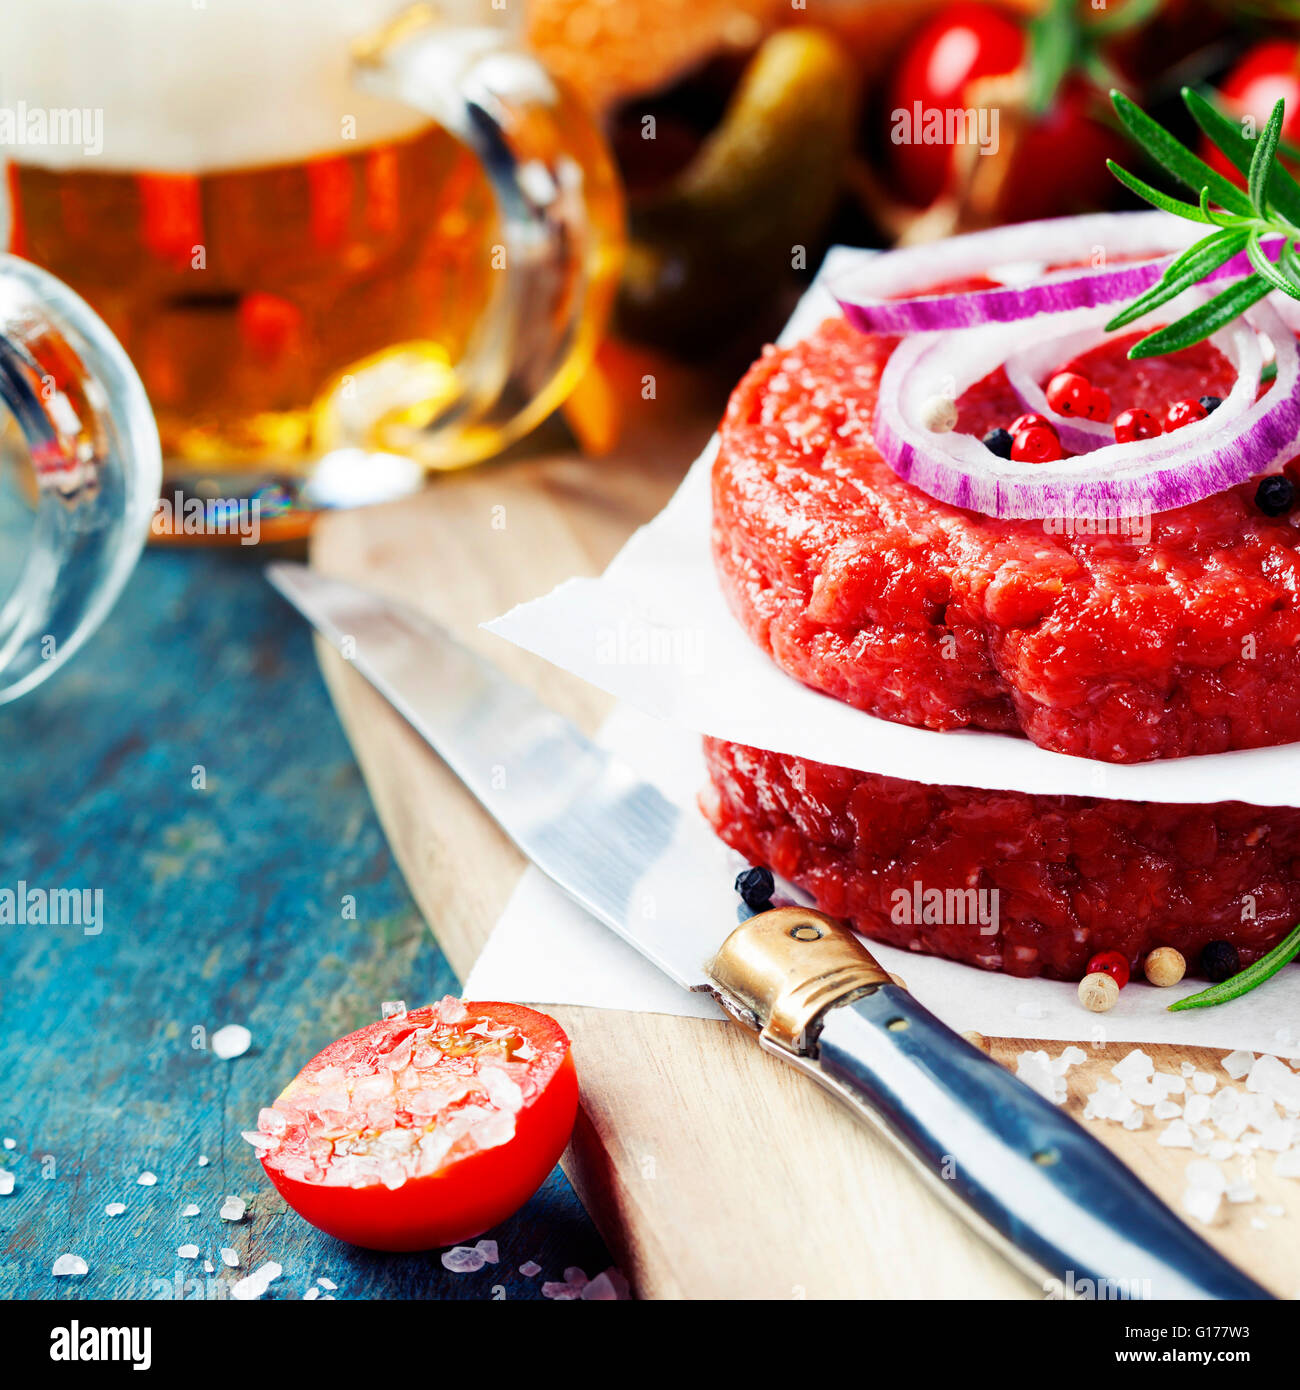 Raw Ground beef meat Burger steak cutlets with seasoning,vegetables and beer on vintage wooden boards Stock Photo